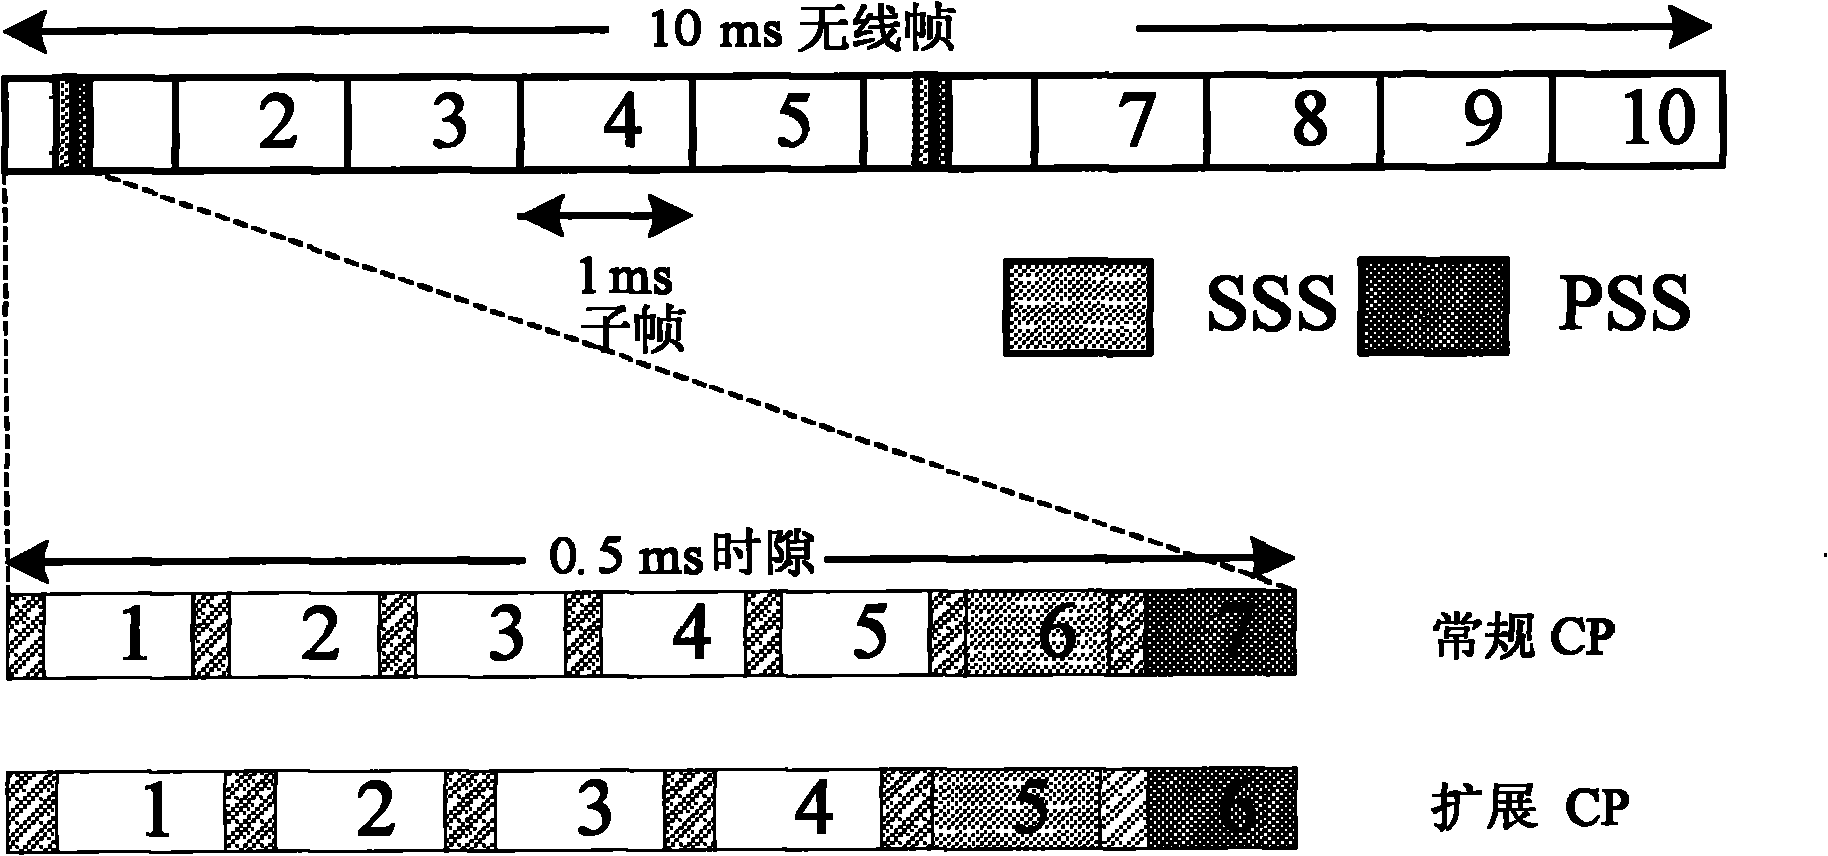 Initial cell searching method of LTE (Long Term Evolution) under high-speed mobile condition